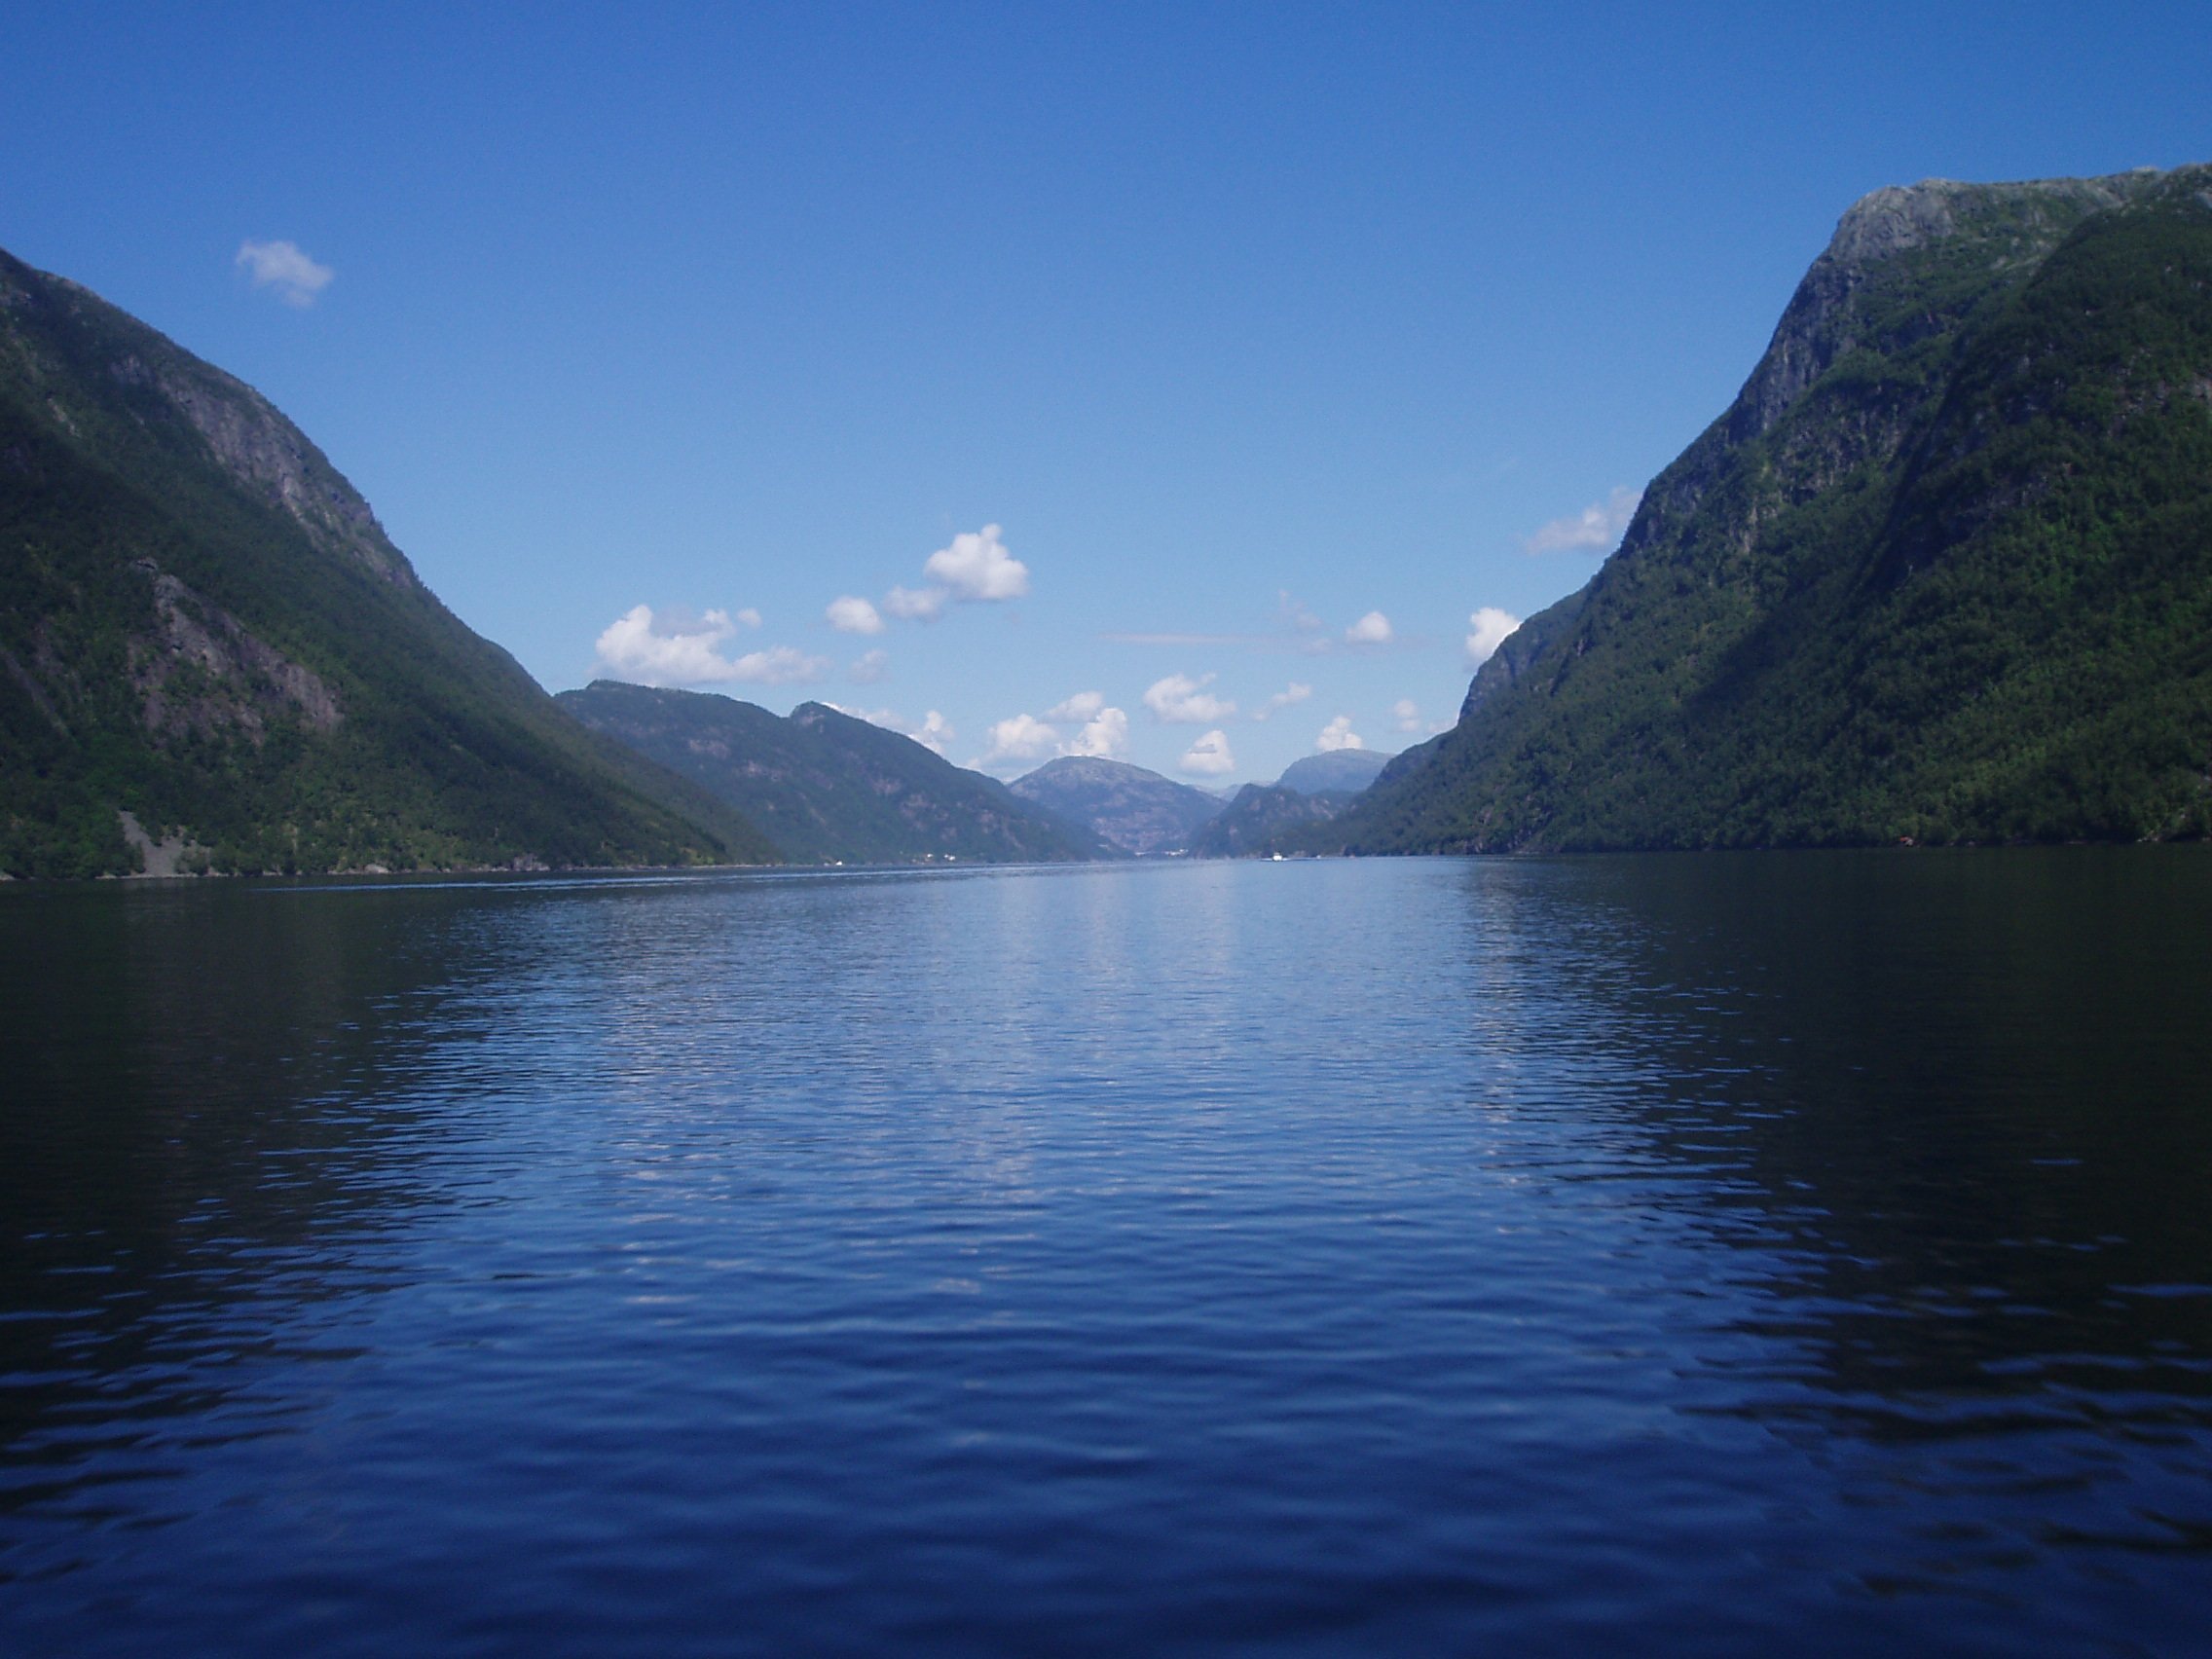 Veafjorden - Spectacular views from one of the beautiful fjords from western Norway